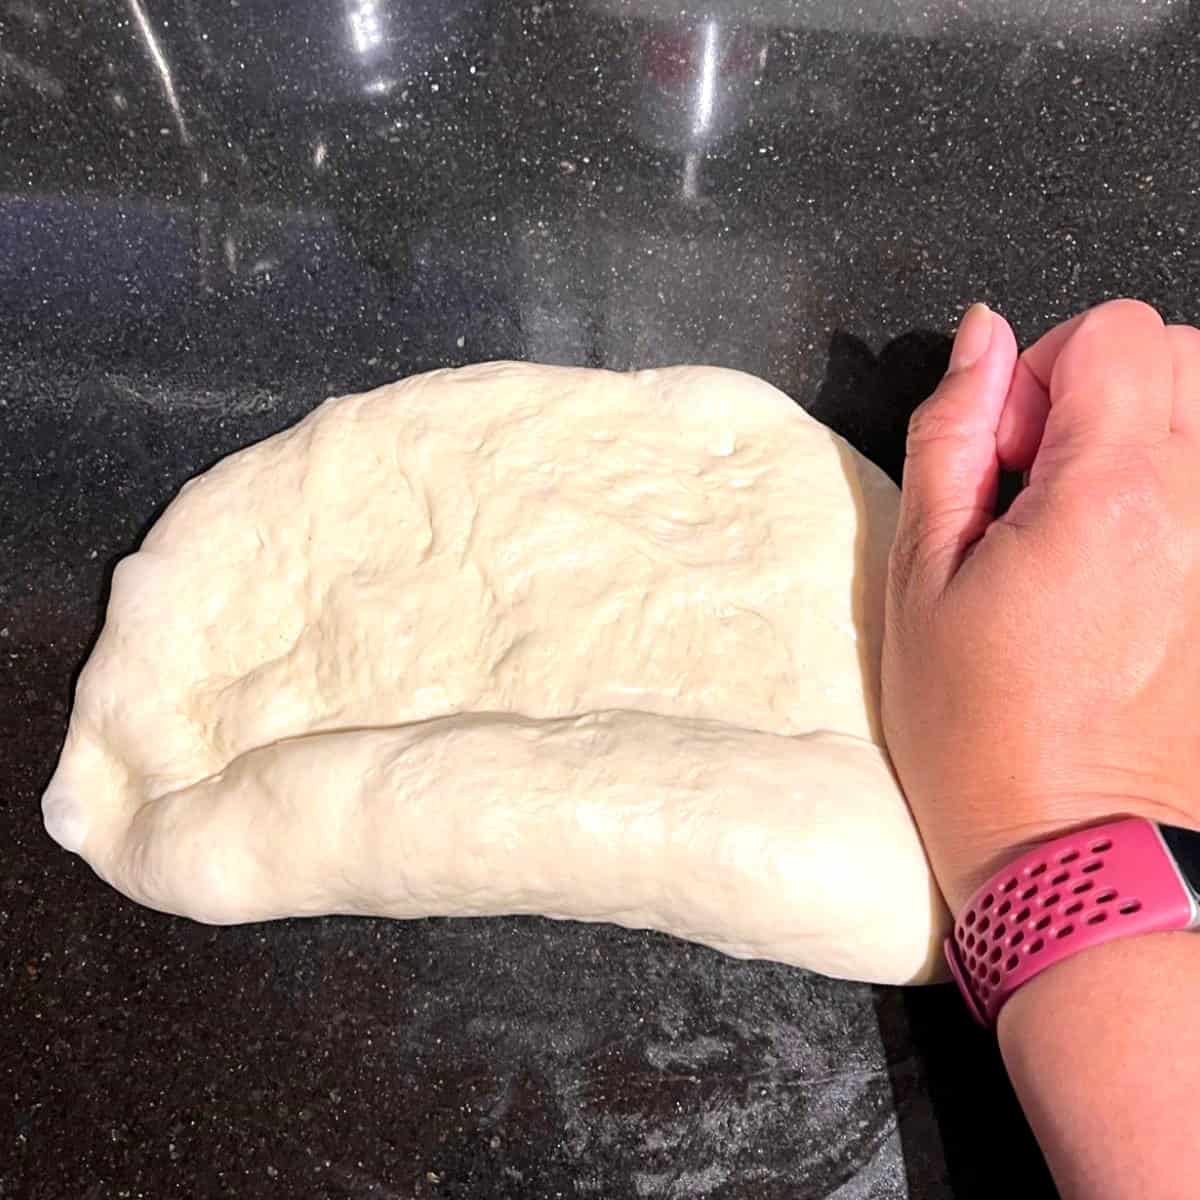 Italian bread loaf being shaped.